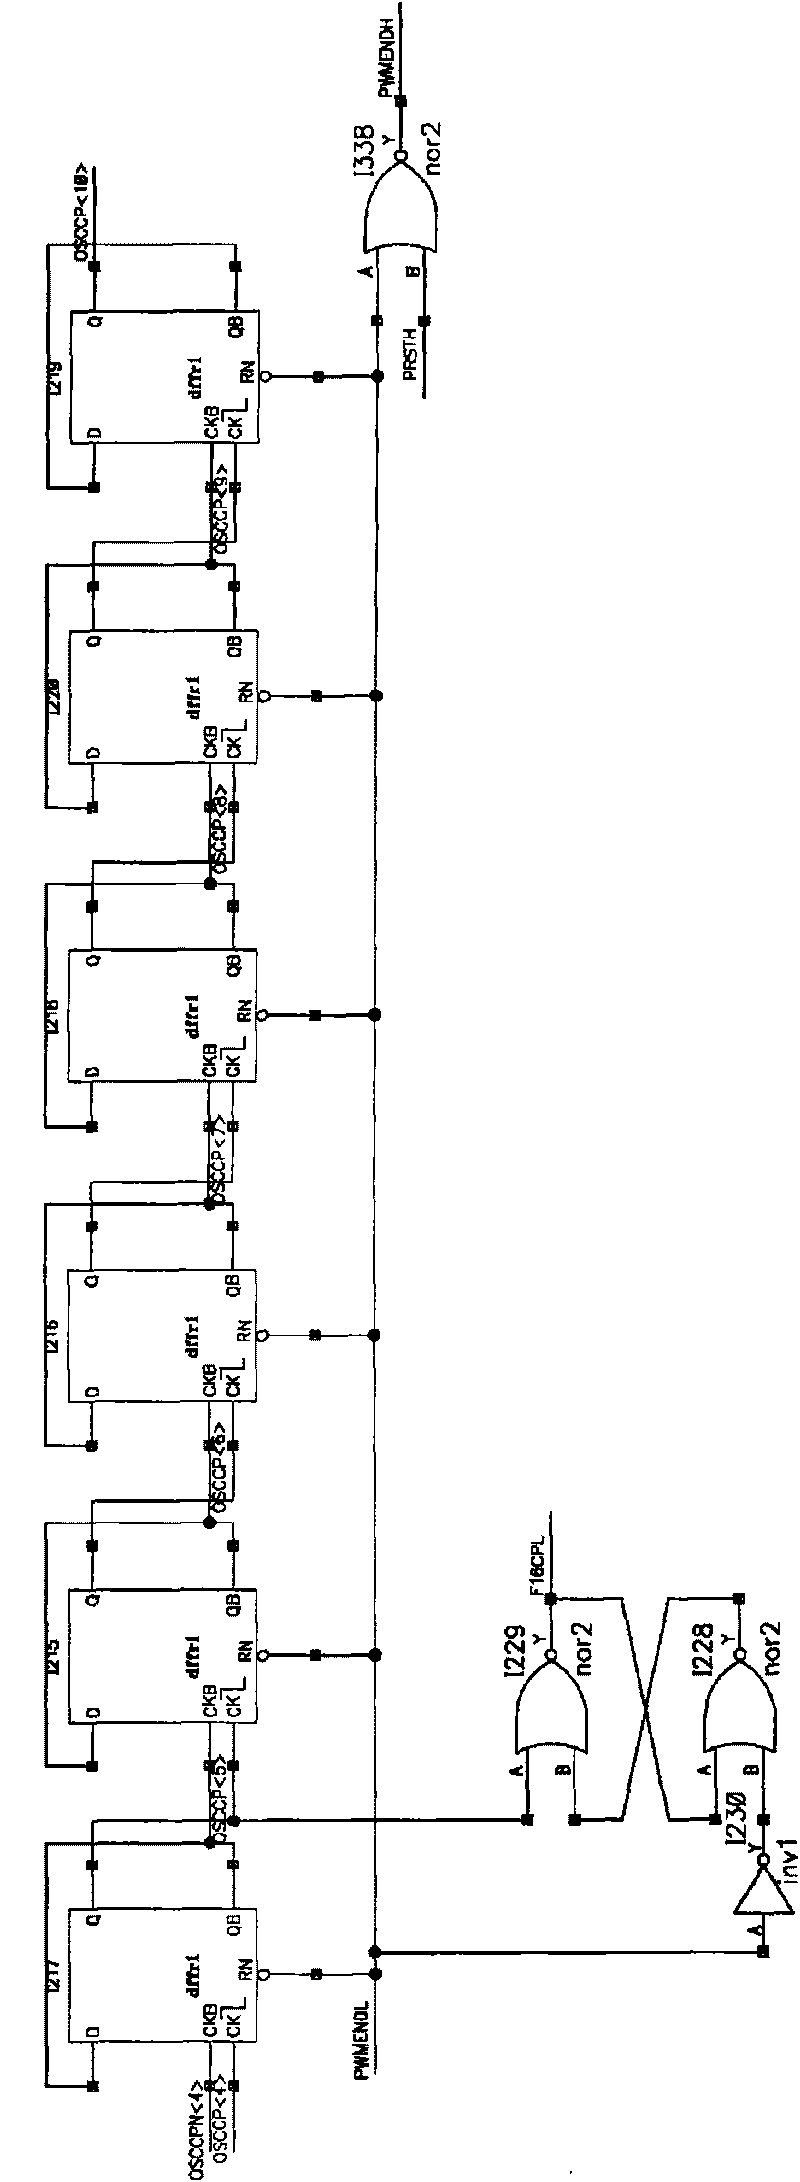 PWM driving method for displaying and driving LED